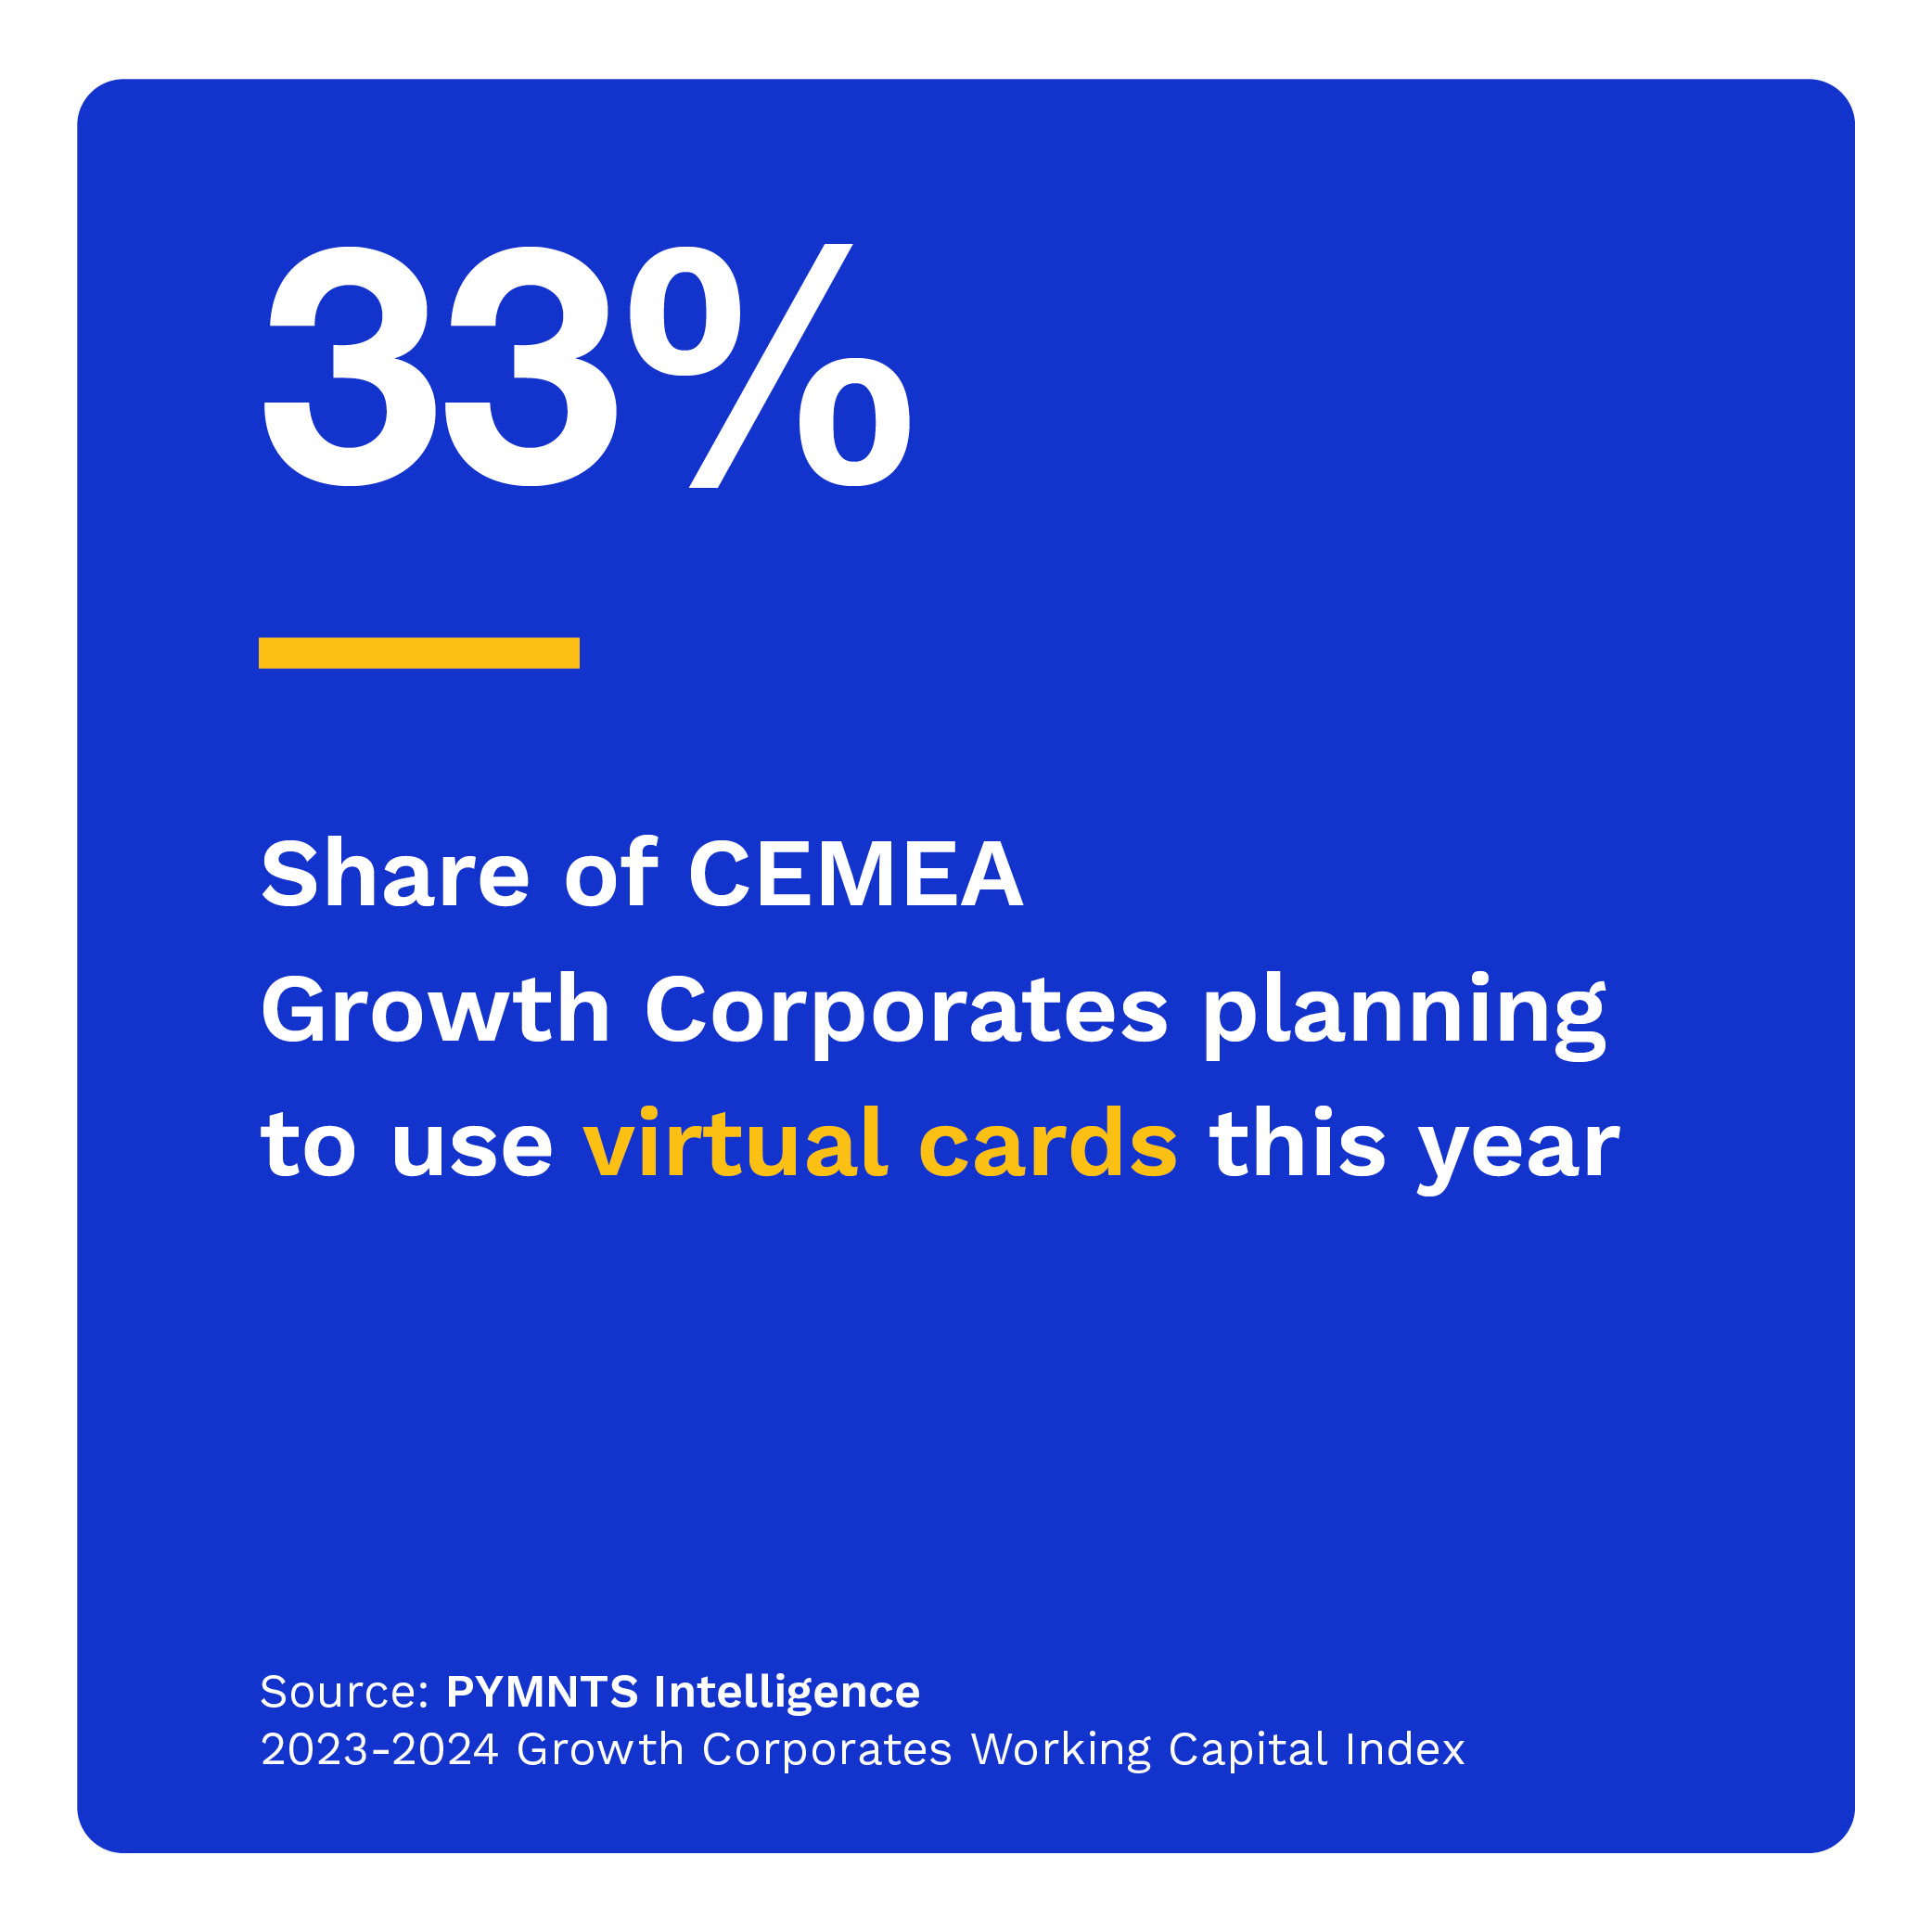  Share of CEMEA Growth Corporates planning to use virtual cards this year